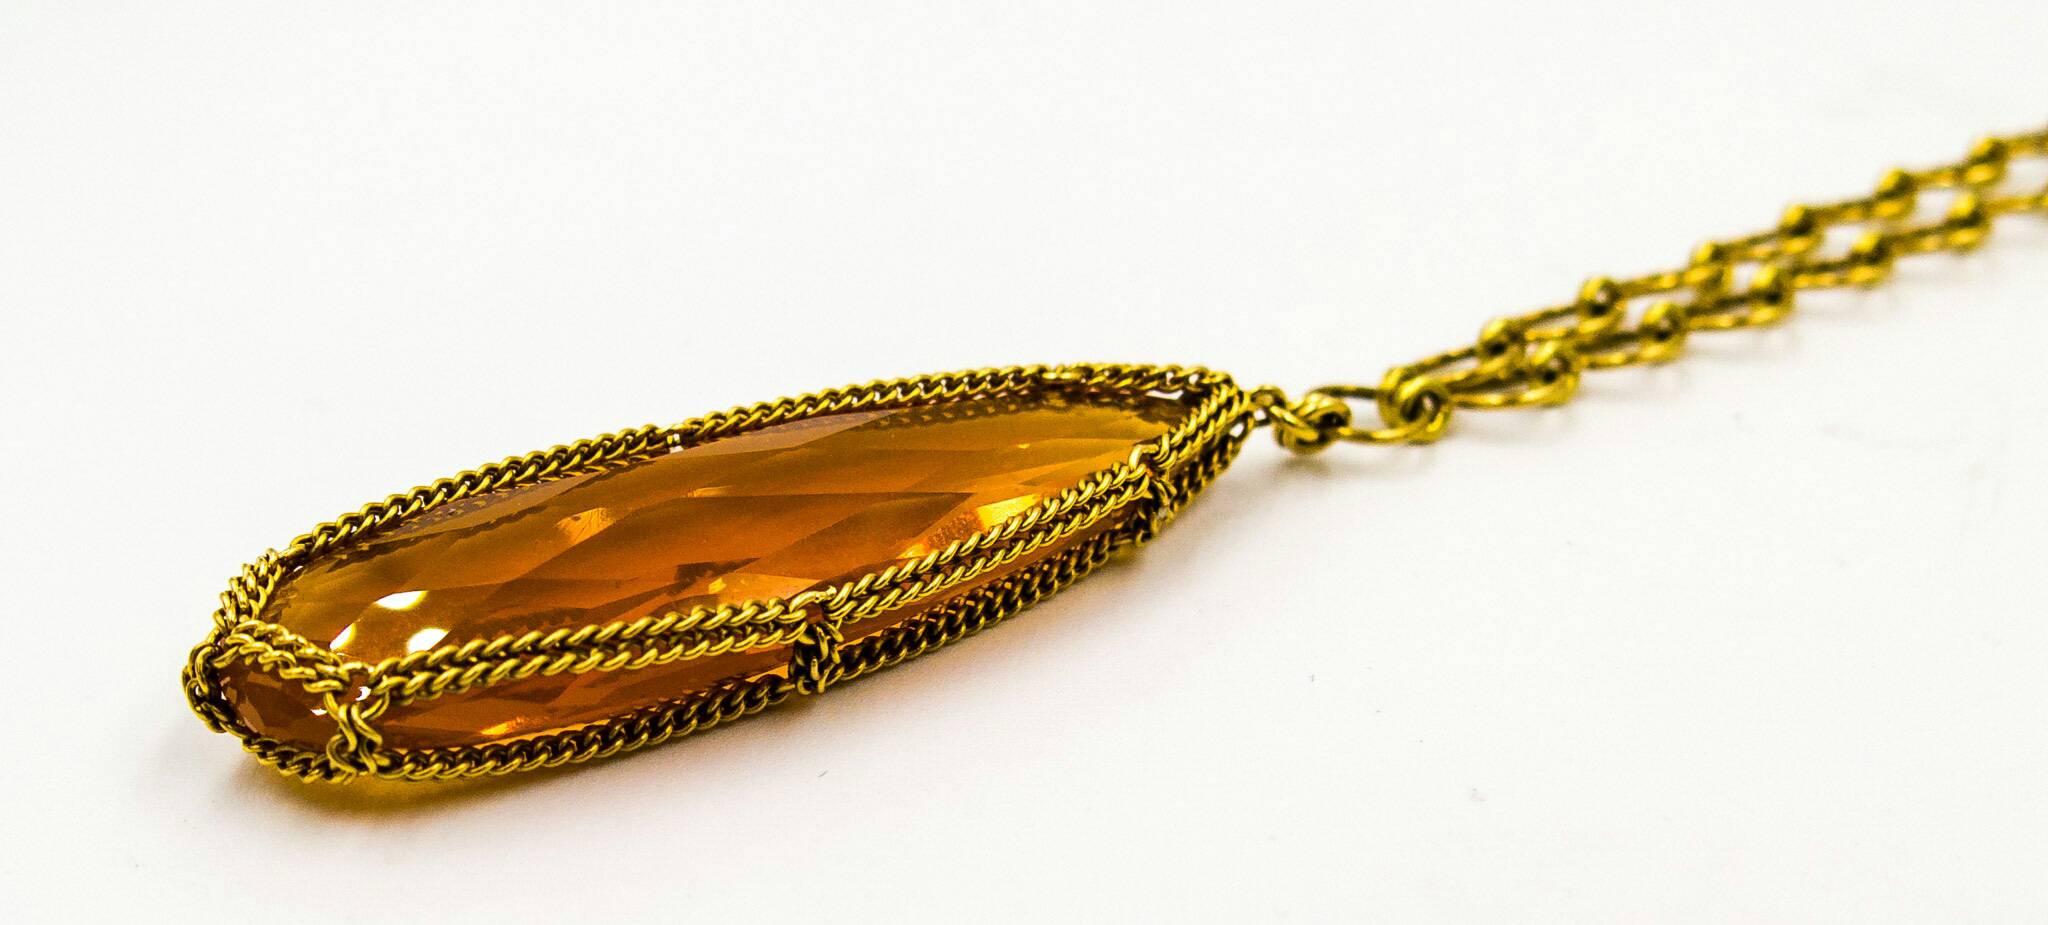    A large, vibrant teardrop Mexican fire opal ( a truly brilliant hot orange, much more so than in the image) hangs suspended from a rich colored 18 karat gold chain.   Many Nak pieces boast extensive use of micro gold chain, and this one is no